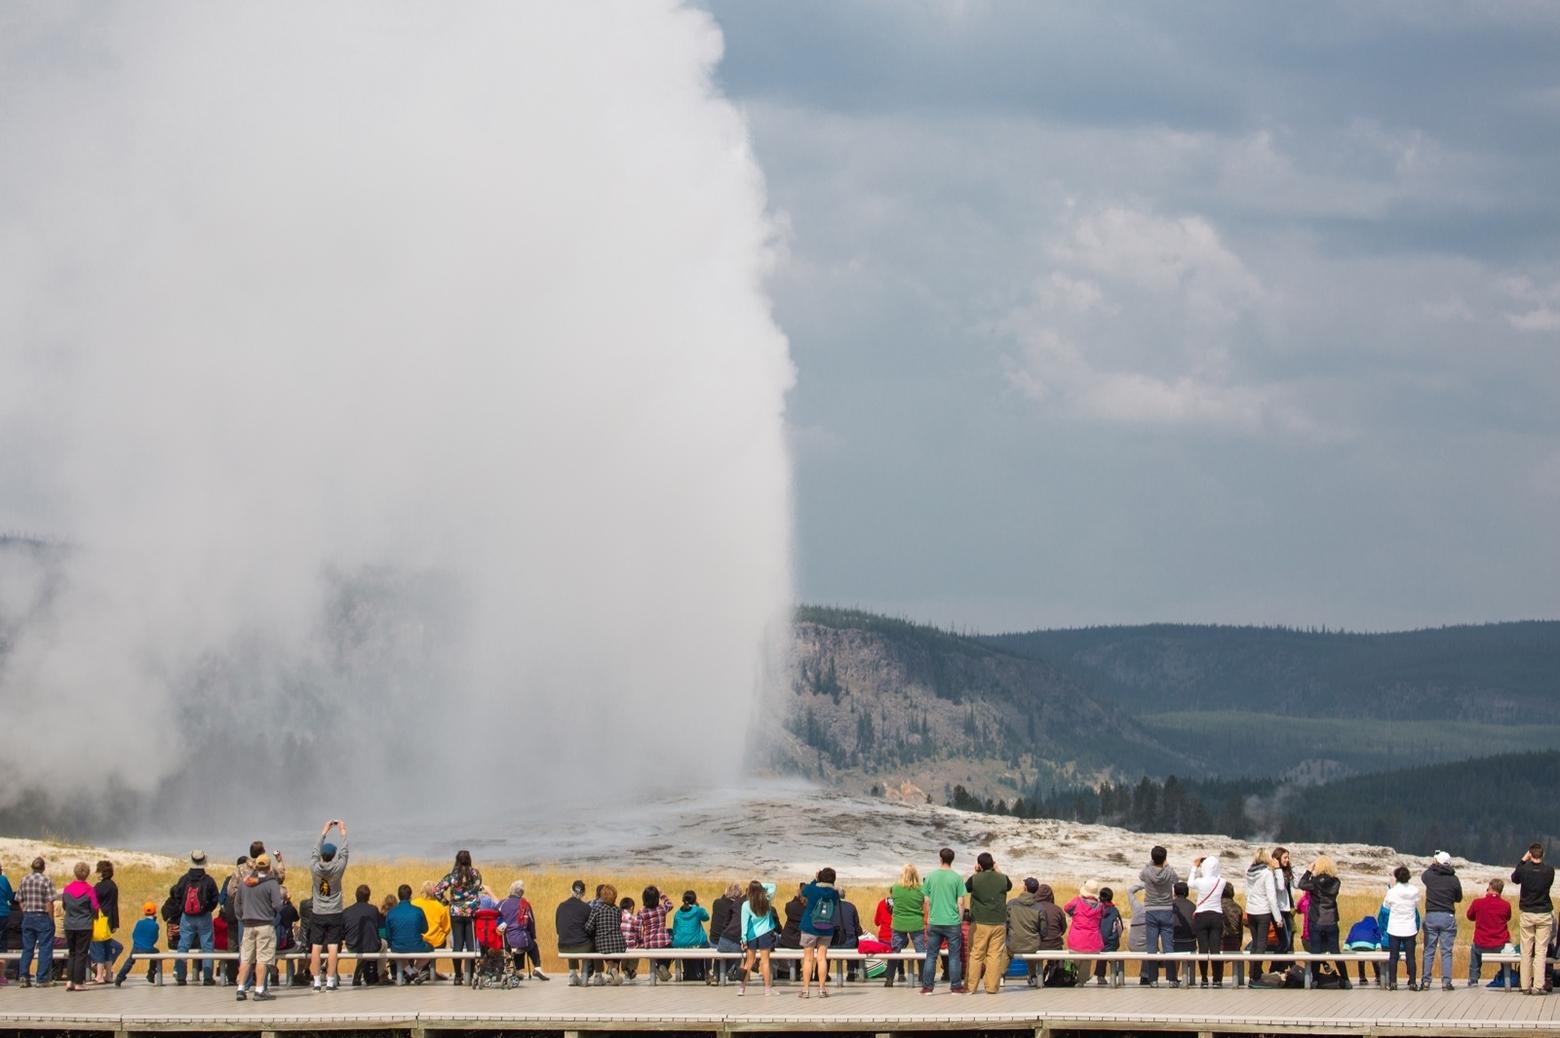 A crowd gathers to watch Old Faithful erupt. Photo courtesy Heal Herbert/NPS